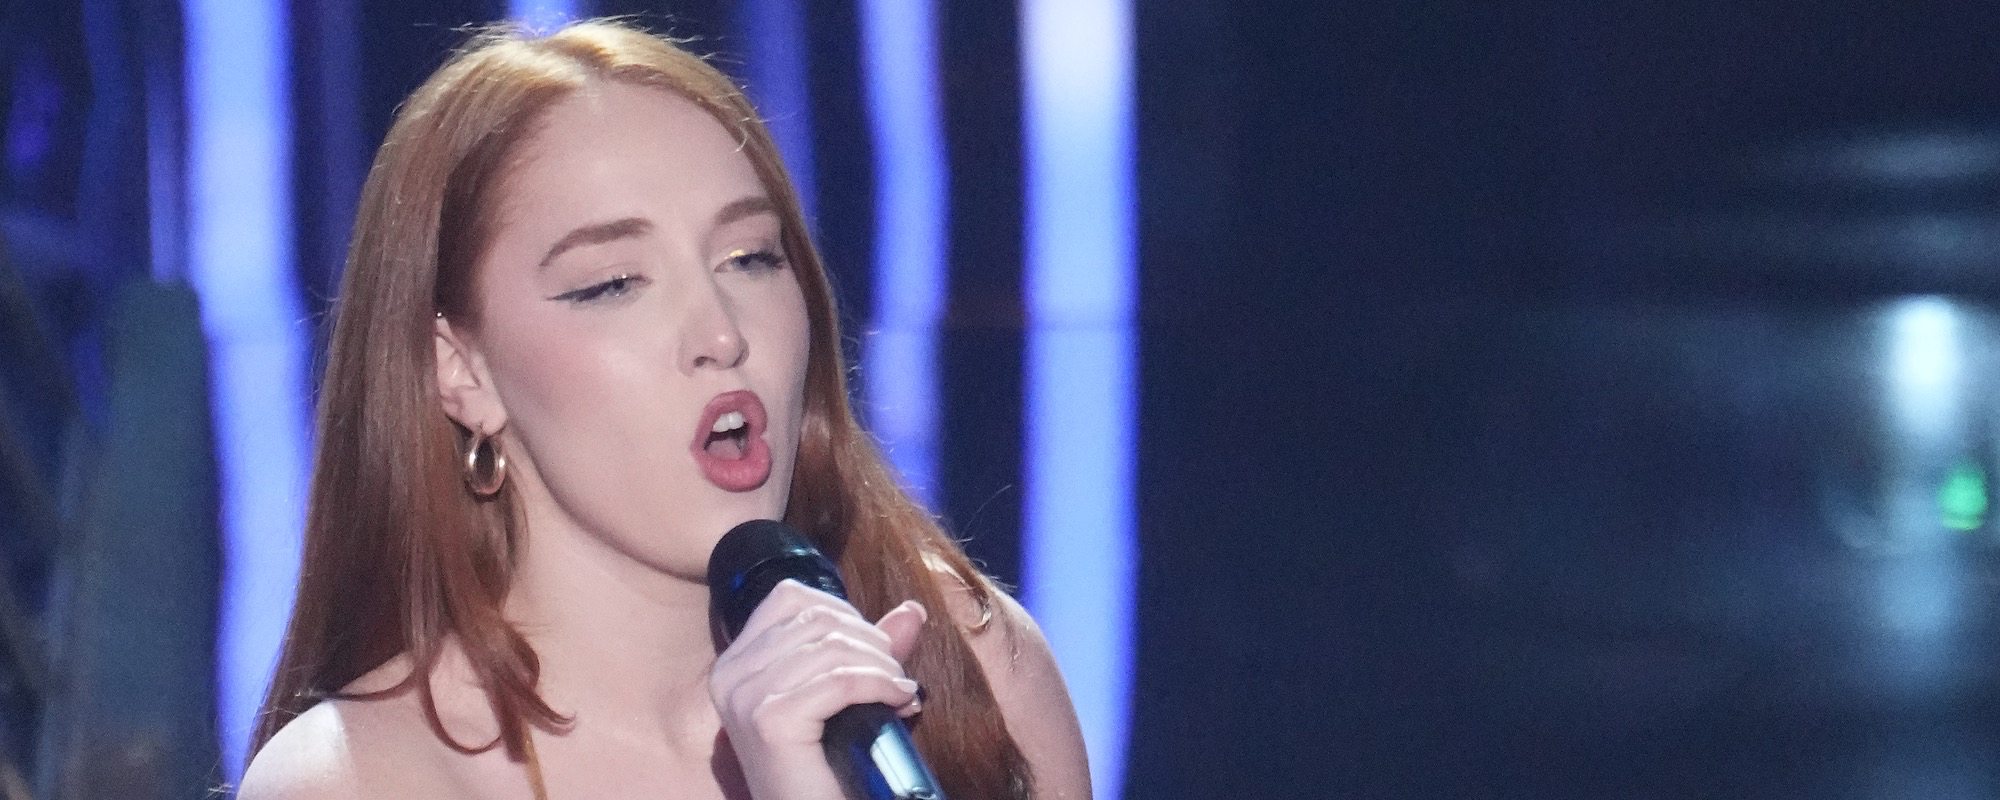 Olivia Soli Takes on Celine Dion Classic, Lands Top 24 on ‘American Idol’